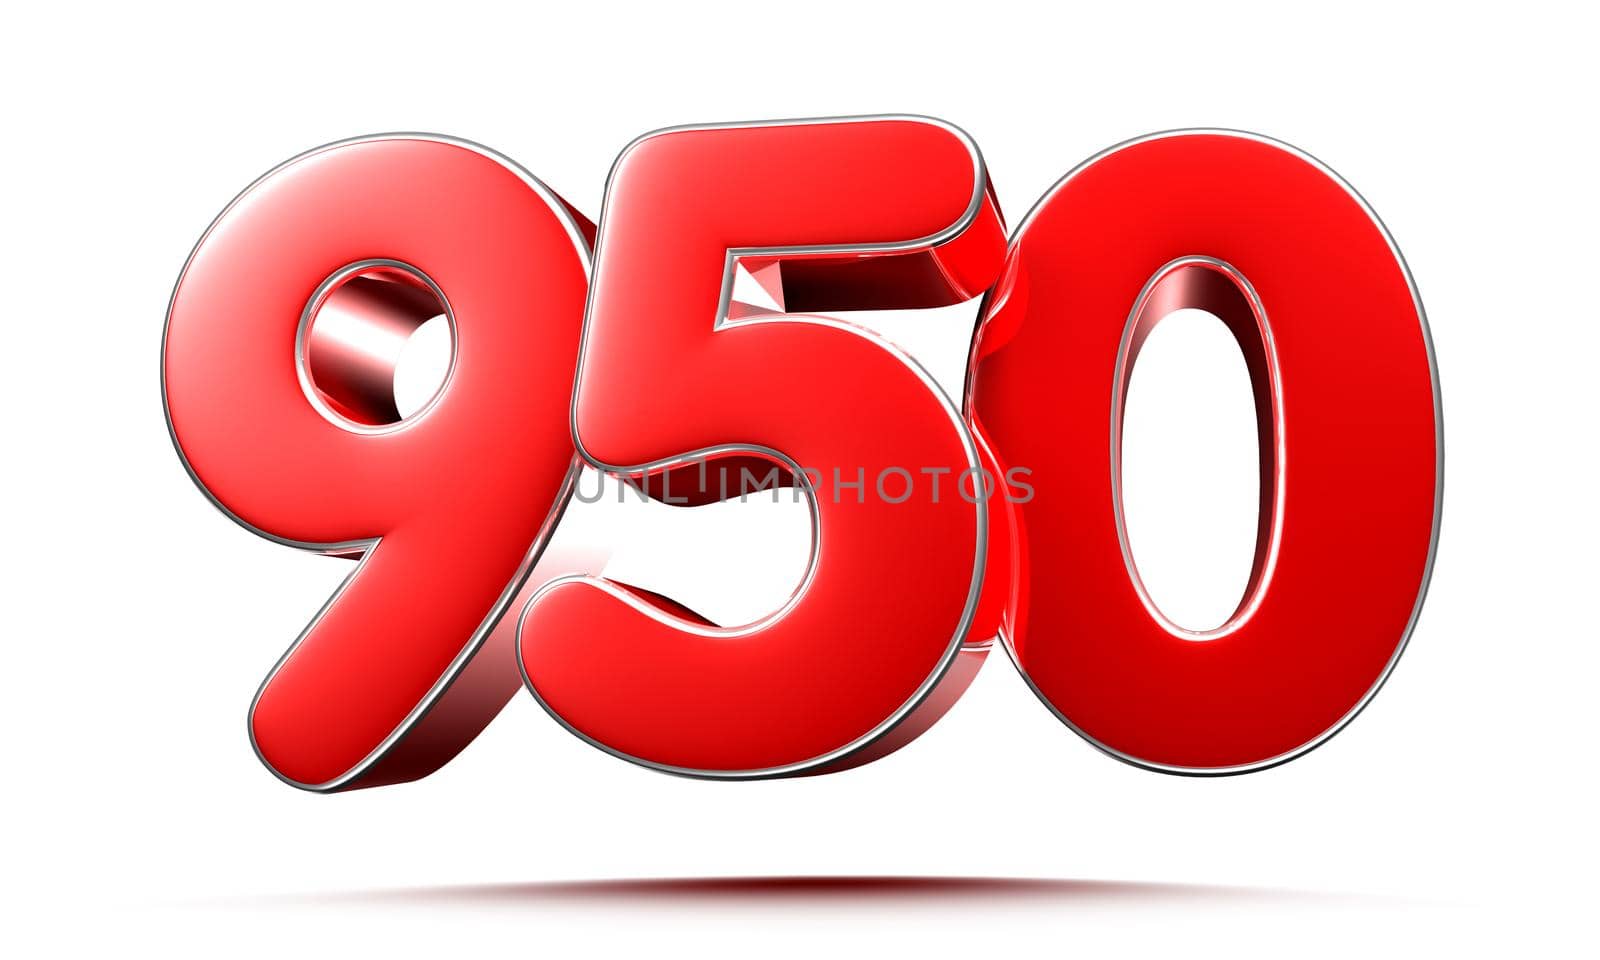 Rounded red numbers 950 on white background 3D illustration with clipping path by thitimontoyai